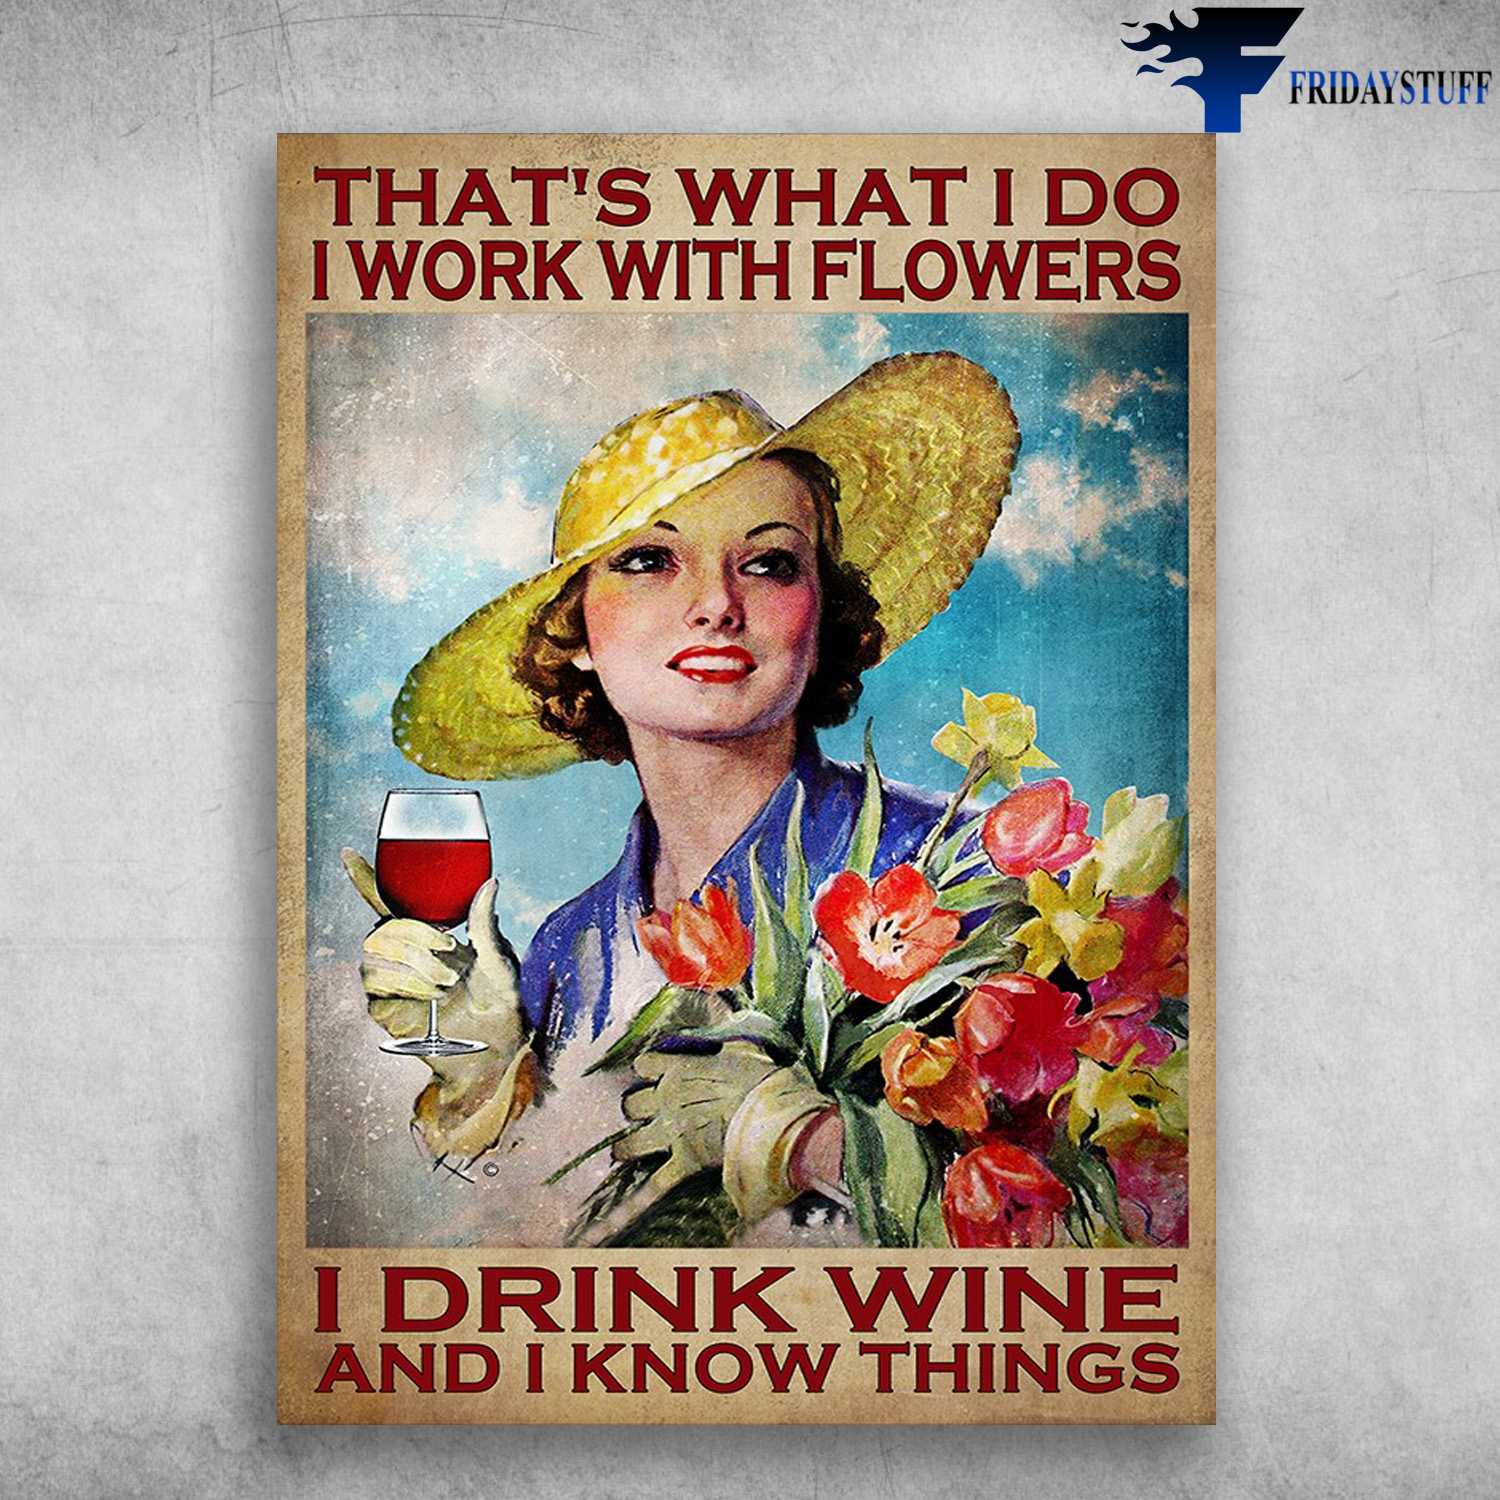 Wine And Flower, Girl Gardening - That's What I Do, I Work With Flowers, I Drink Wine, And I Know Things